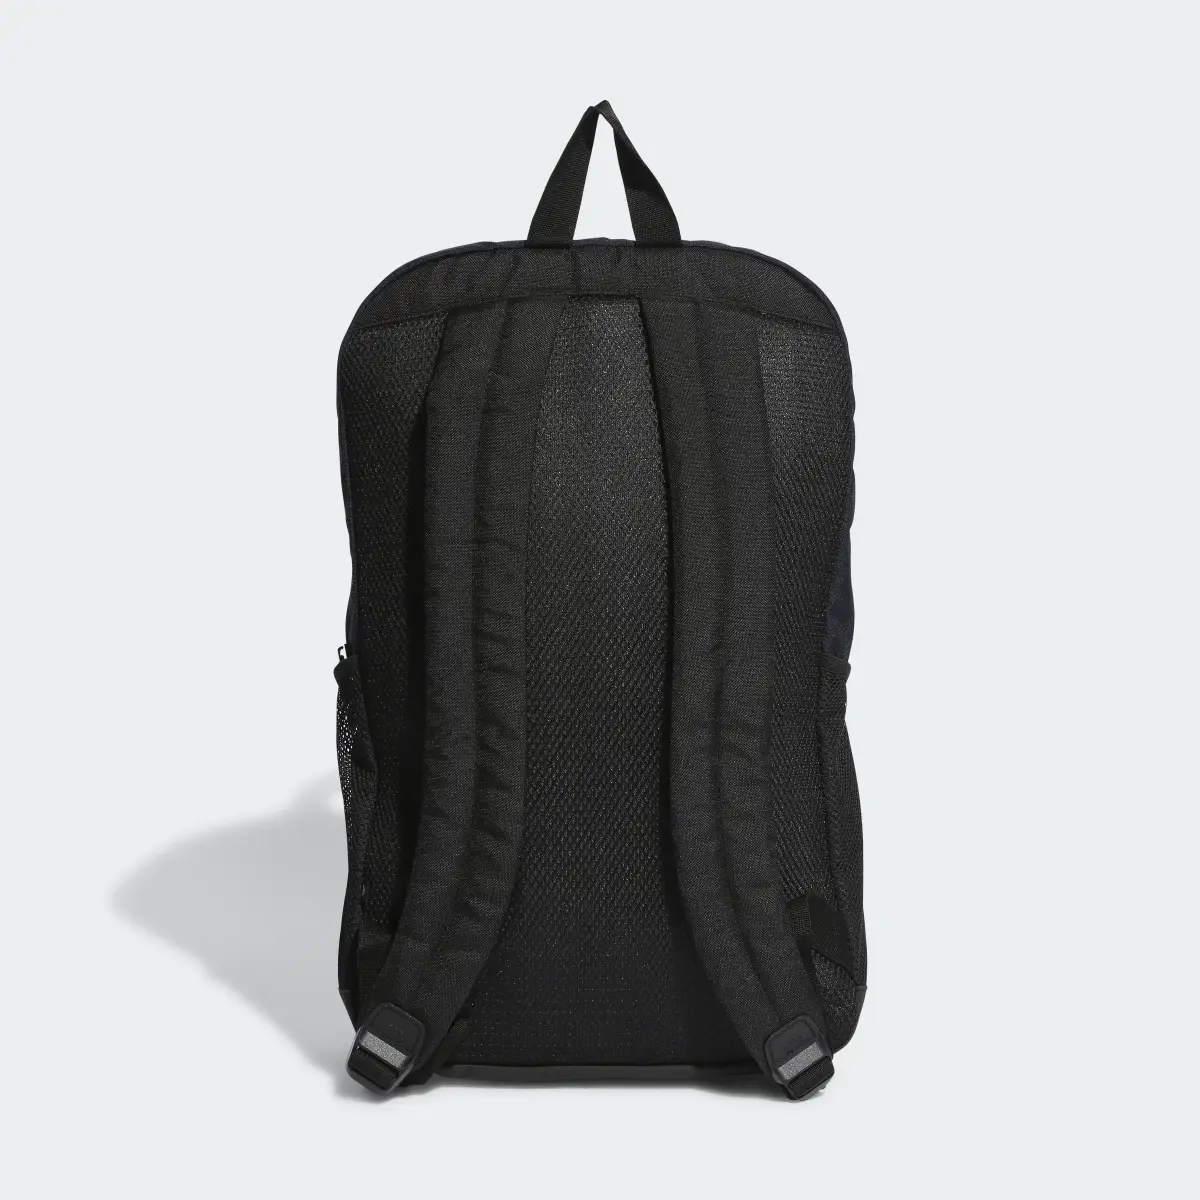 Adidas Motion Linear Backpack. 3